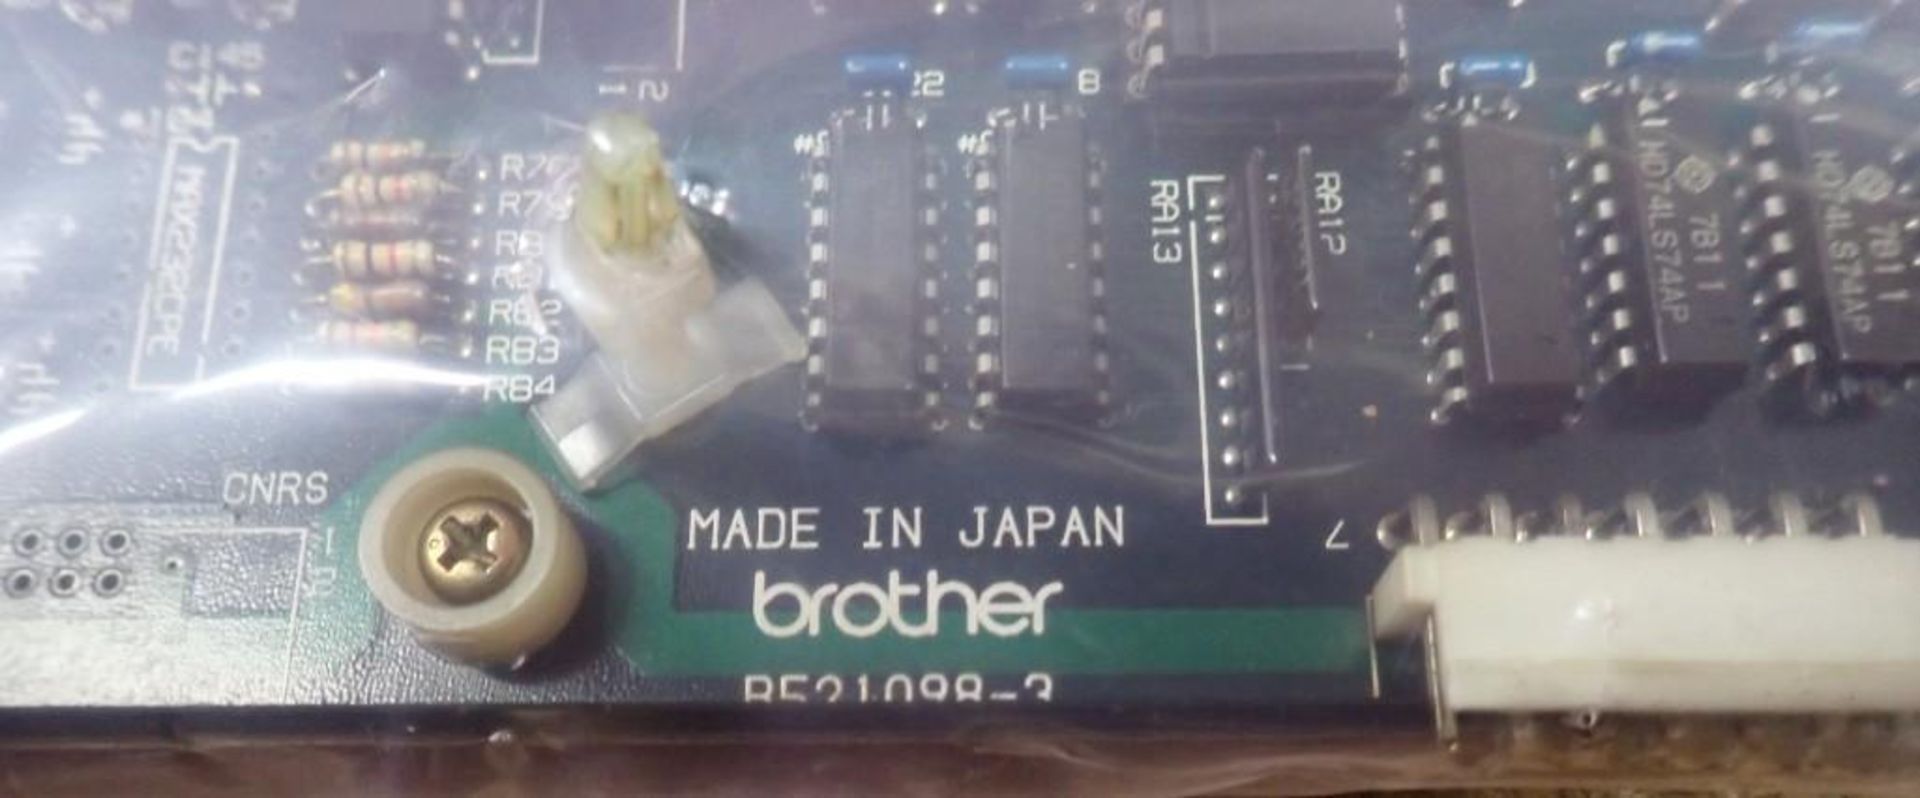 Brother #B521098-3 Circuit Board - Image 3 of 6